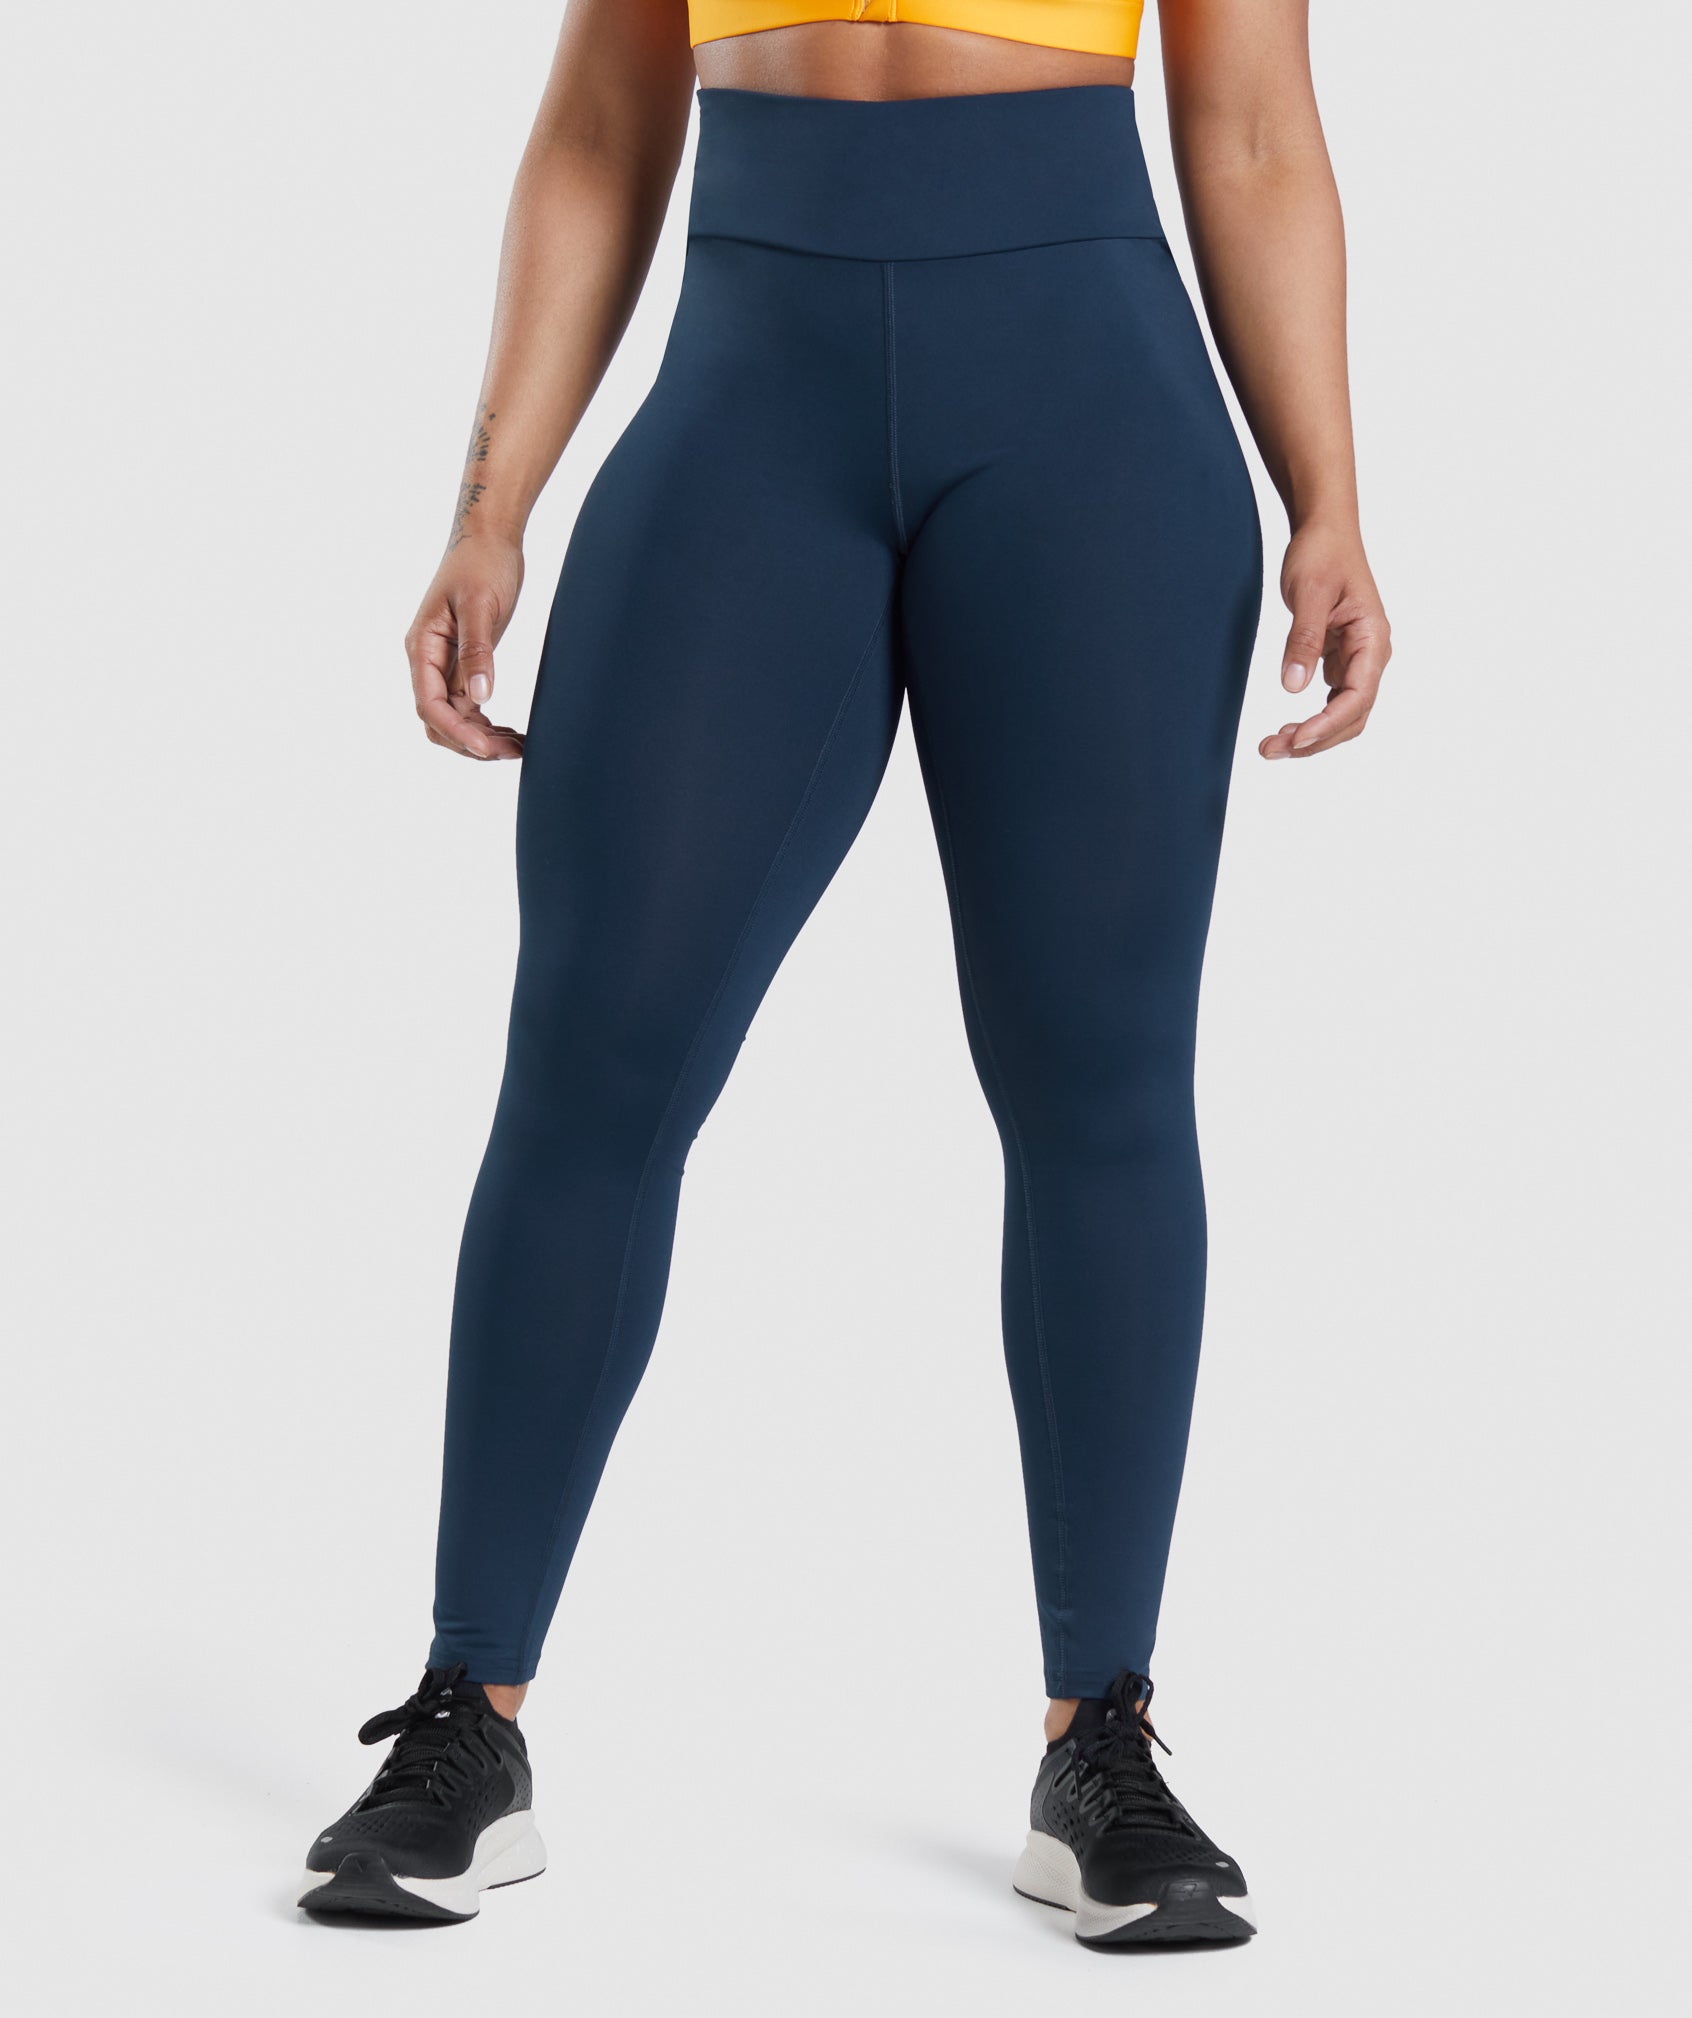 Mineral Washed Yoga Leggings - Bold and Curvy